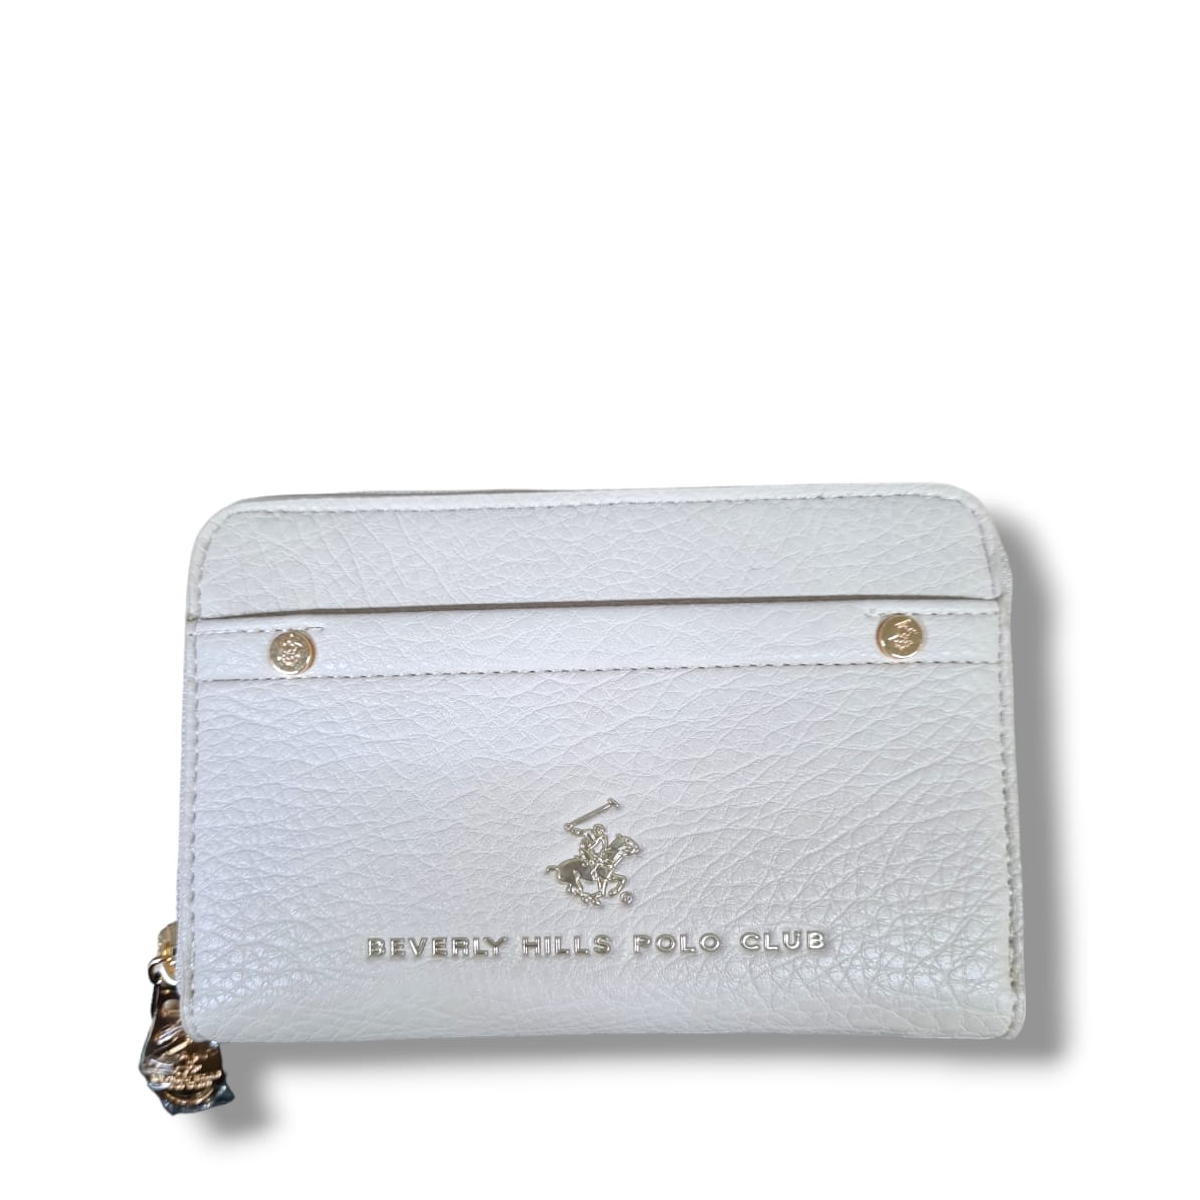 BEVERLY HILLS POLO CLUB PORTAFOGLIO DONNA SIMILPELLE BH-3739-BE